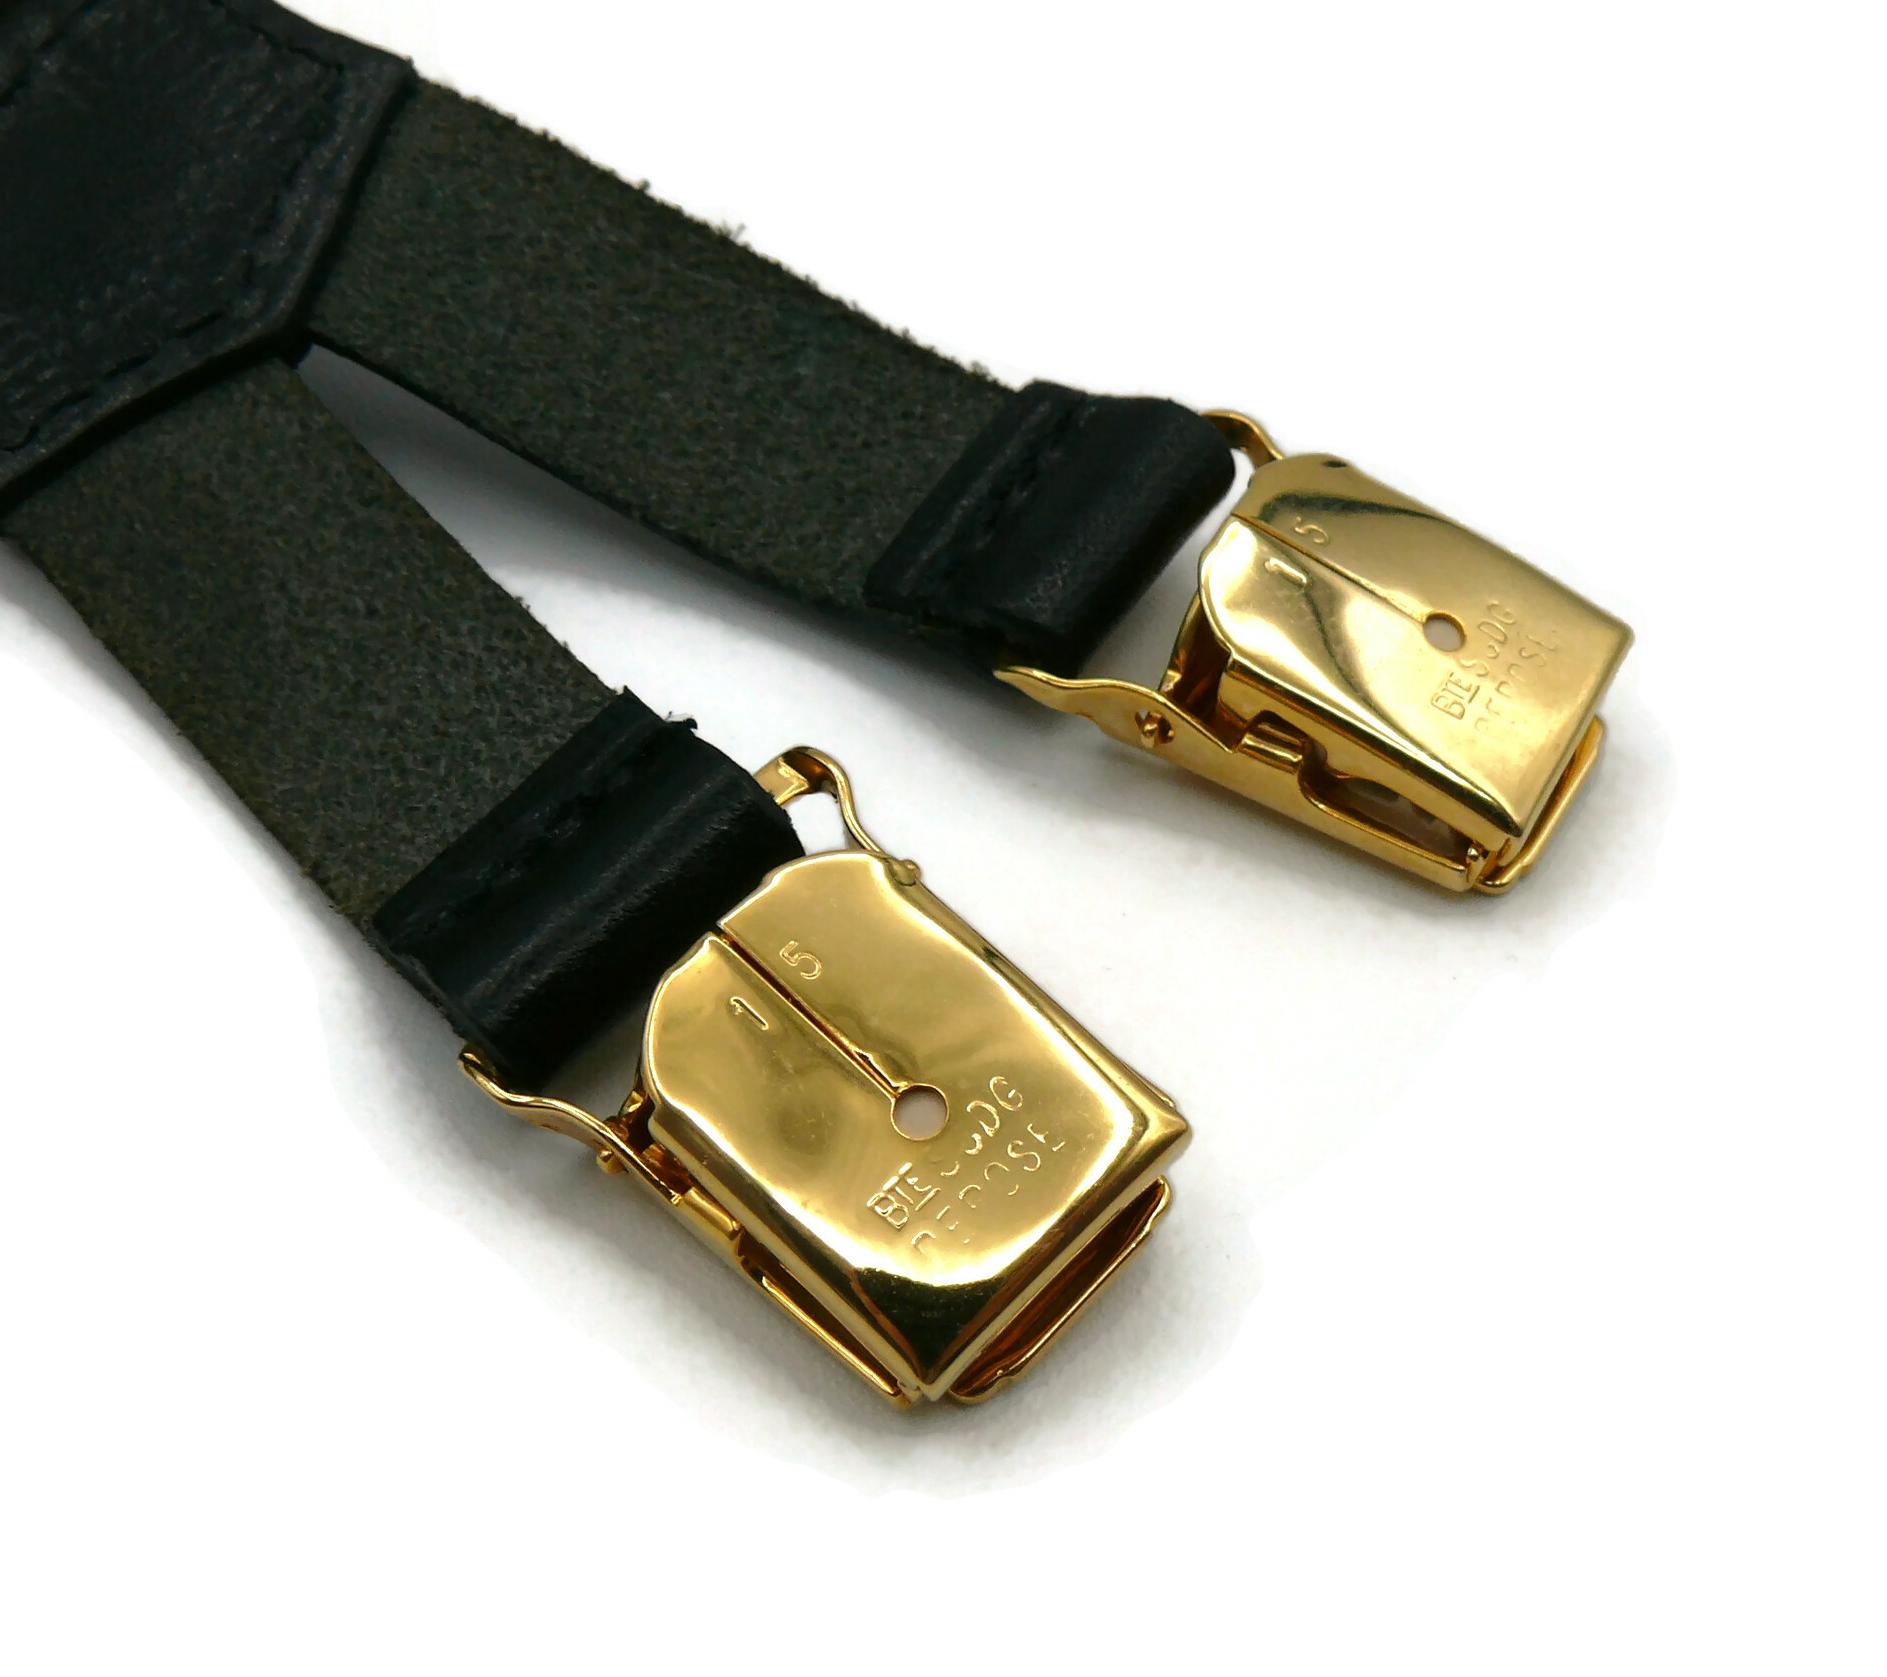 CHANEL by KARL LAGERFELD Vintage Iconic Light Brown and Black Suspenders, 1994 For Sale 10